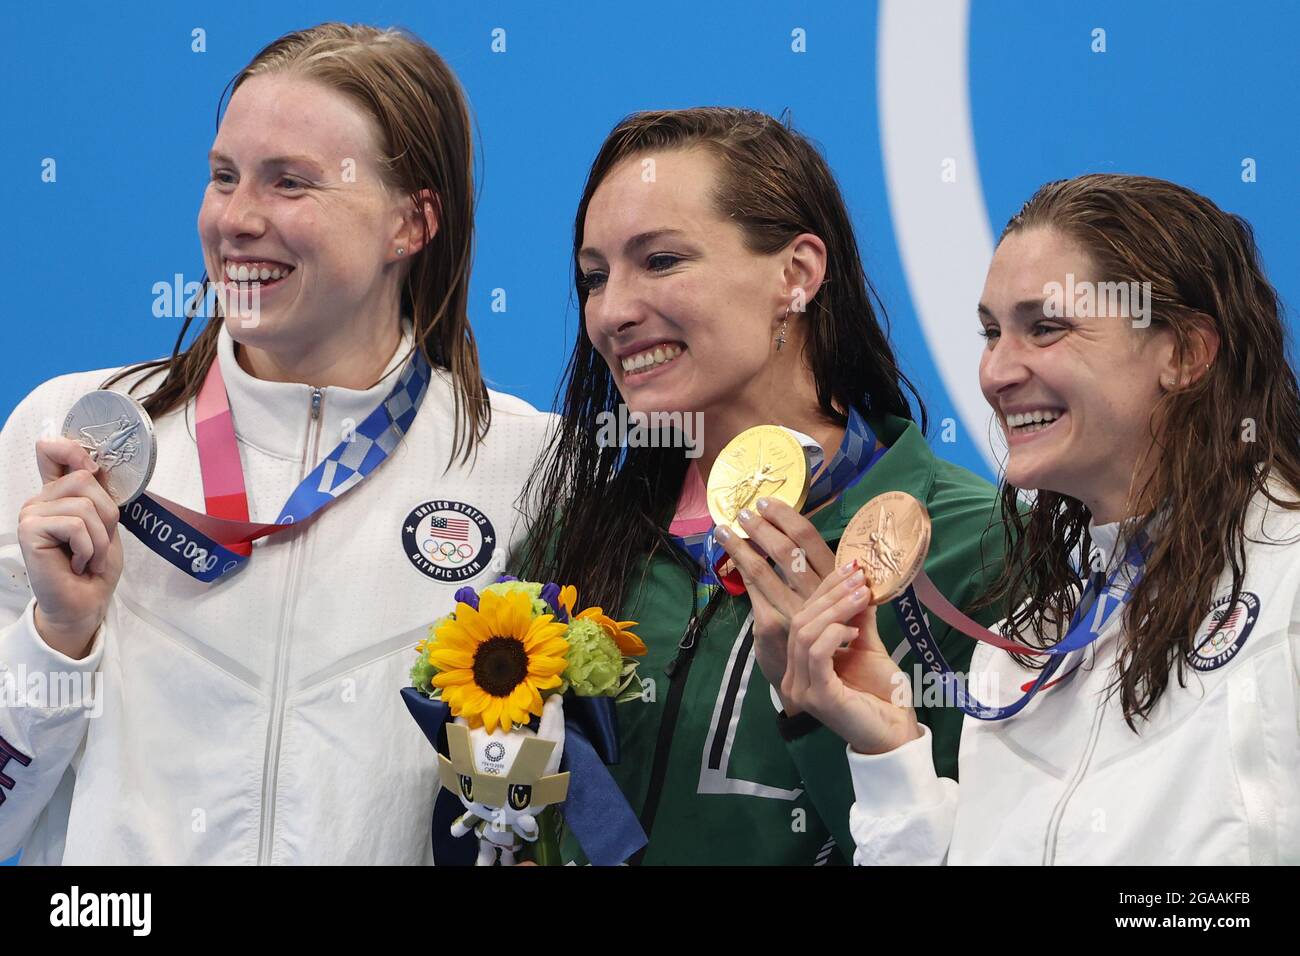 Tokio, Japan. 30th July, 2021. Swimming: Olympics, women, 200m breaststroke, final at Tokyo Aquatics Centre. Tatjana Schoenmaker (M) from South Africa with gold medal next to Lilly King (l) from USA with silver medal and Annie Lazor from USA with bronze medal at the award ceremony. Credit: Oliver Weiken/dpa/Alamy Live News Stock Photo